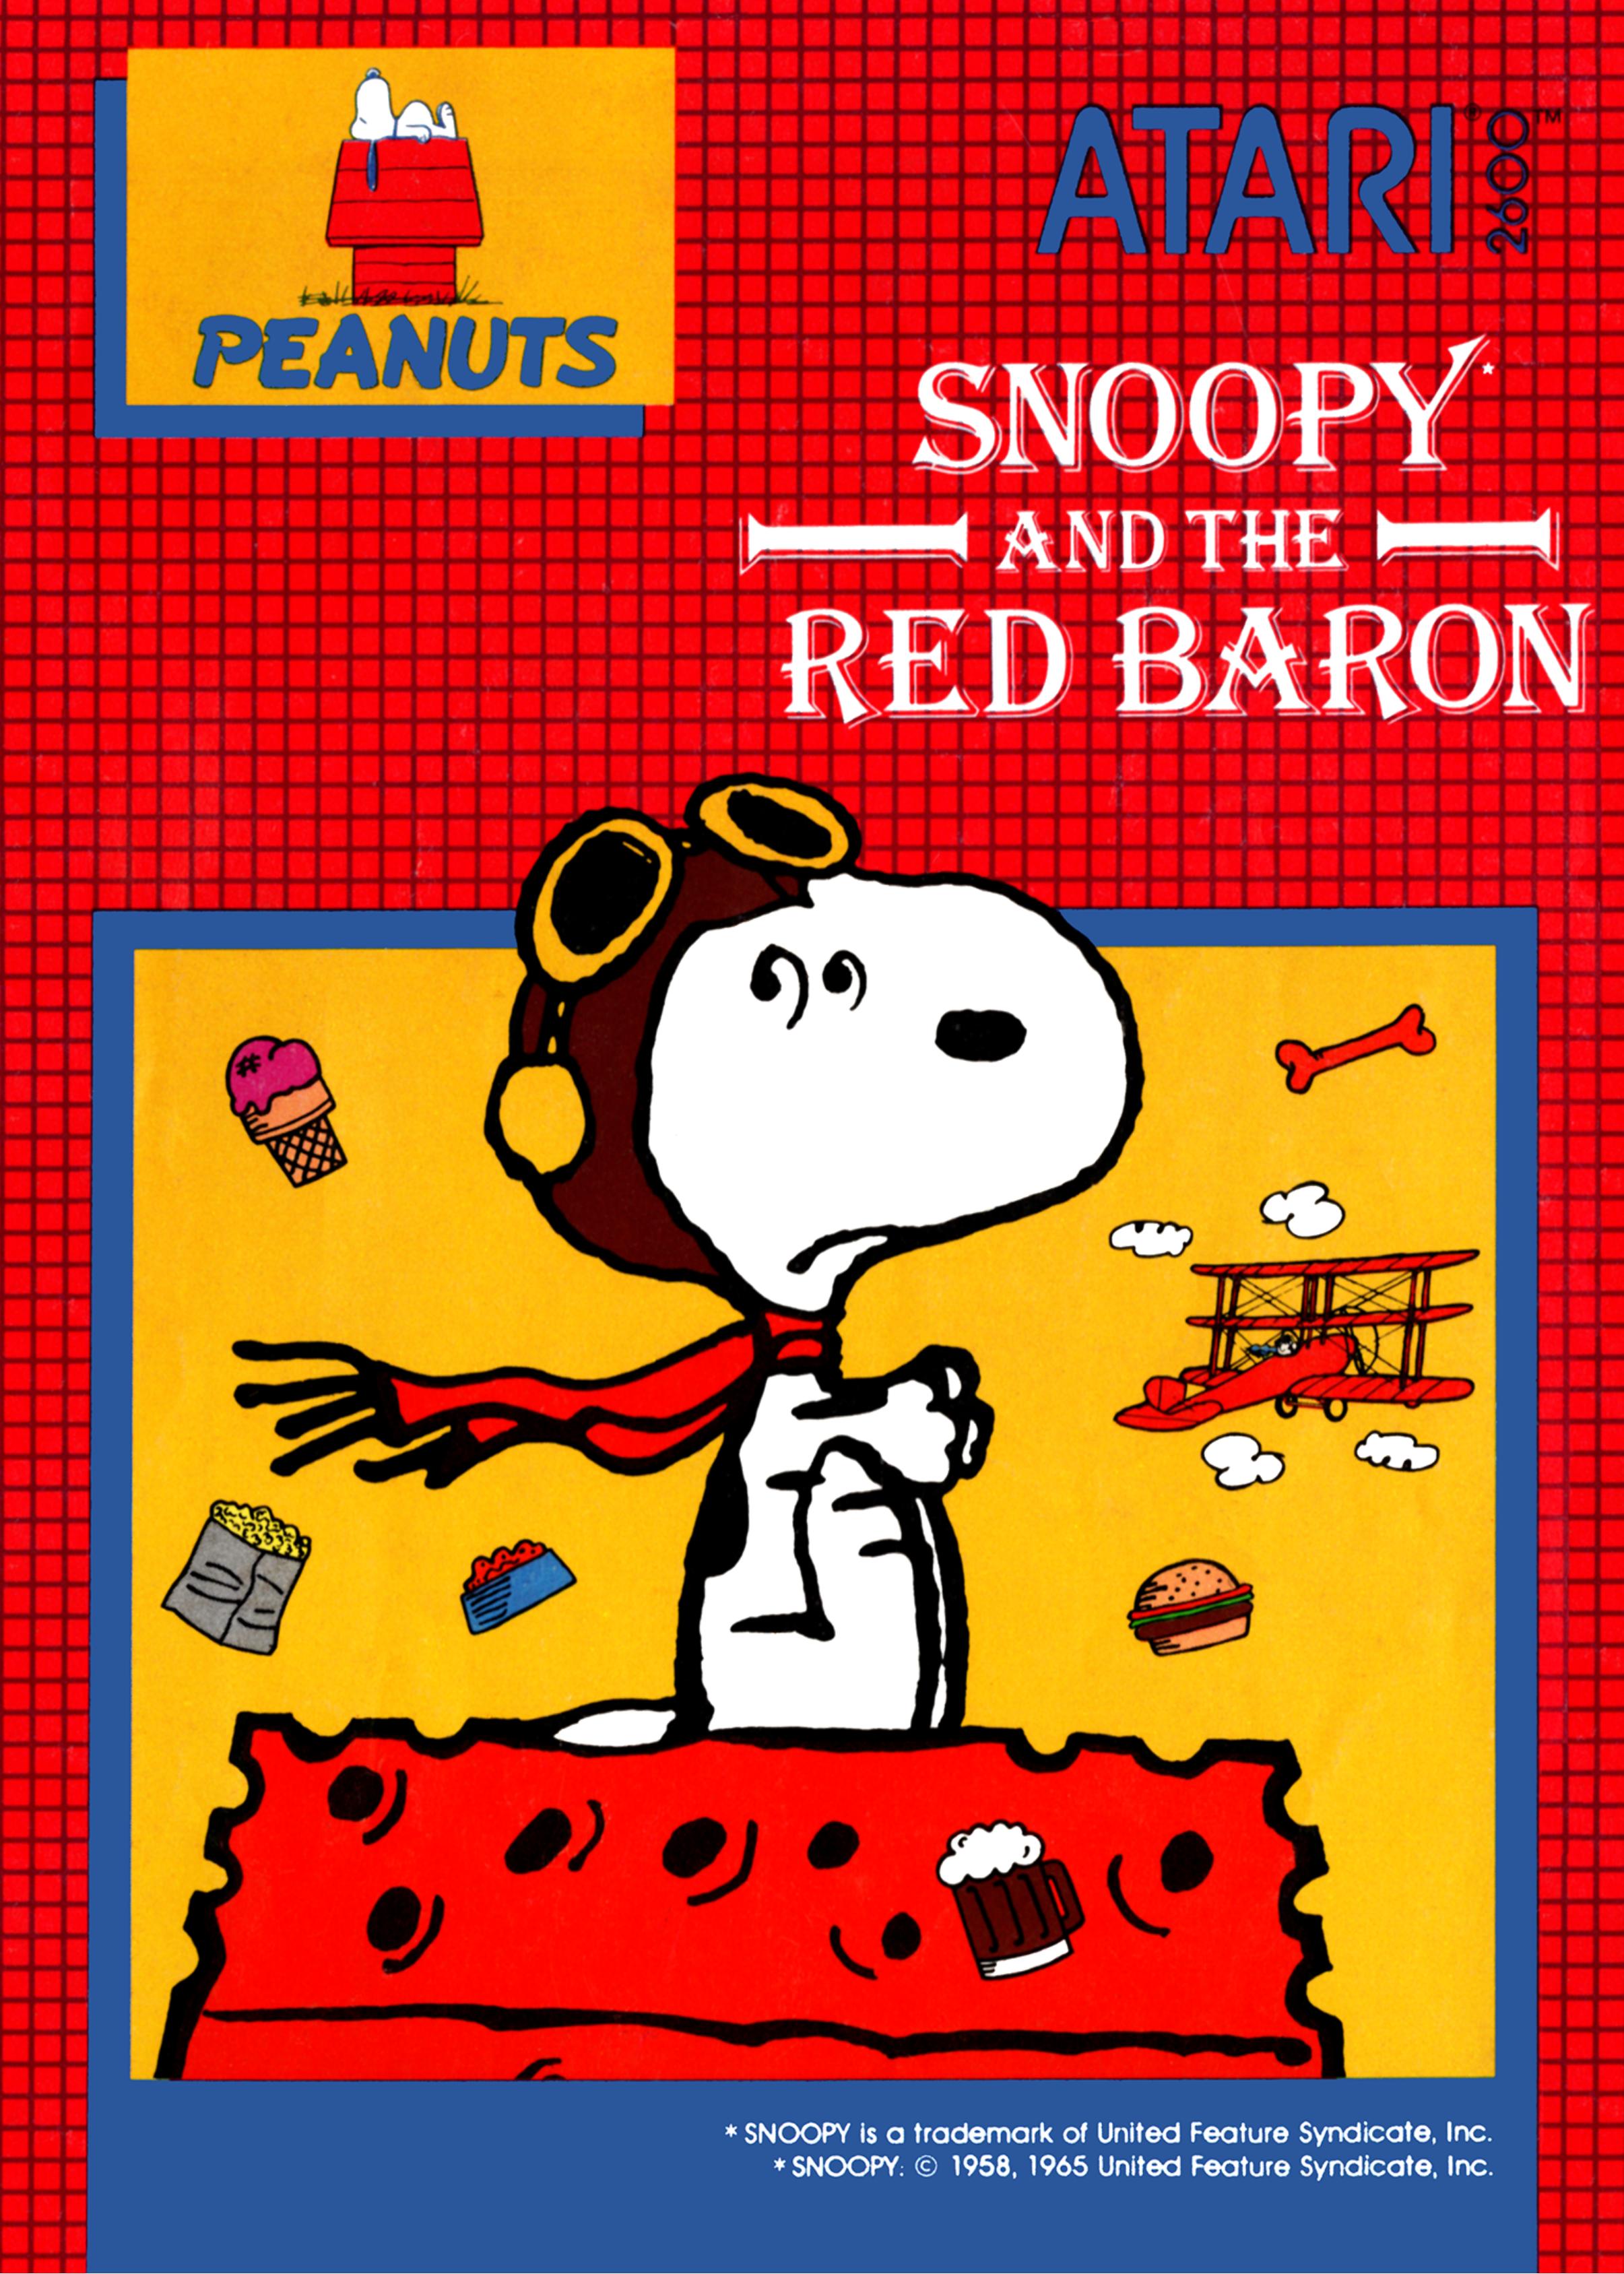 Snoopy and the Red Baron (Atari) by Jonathan Grimm